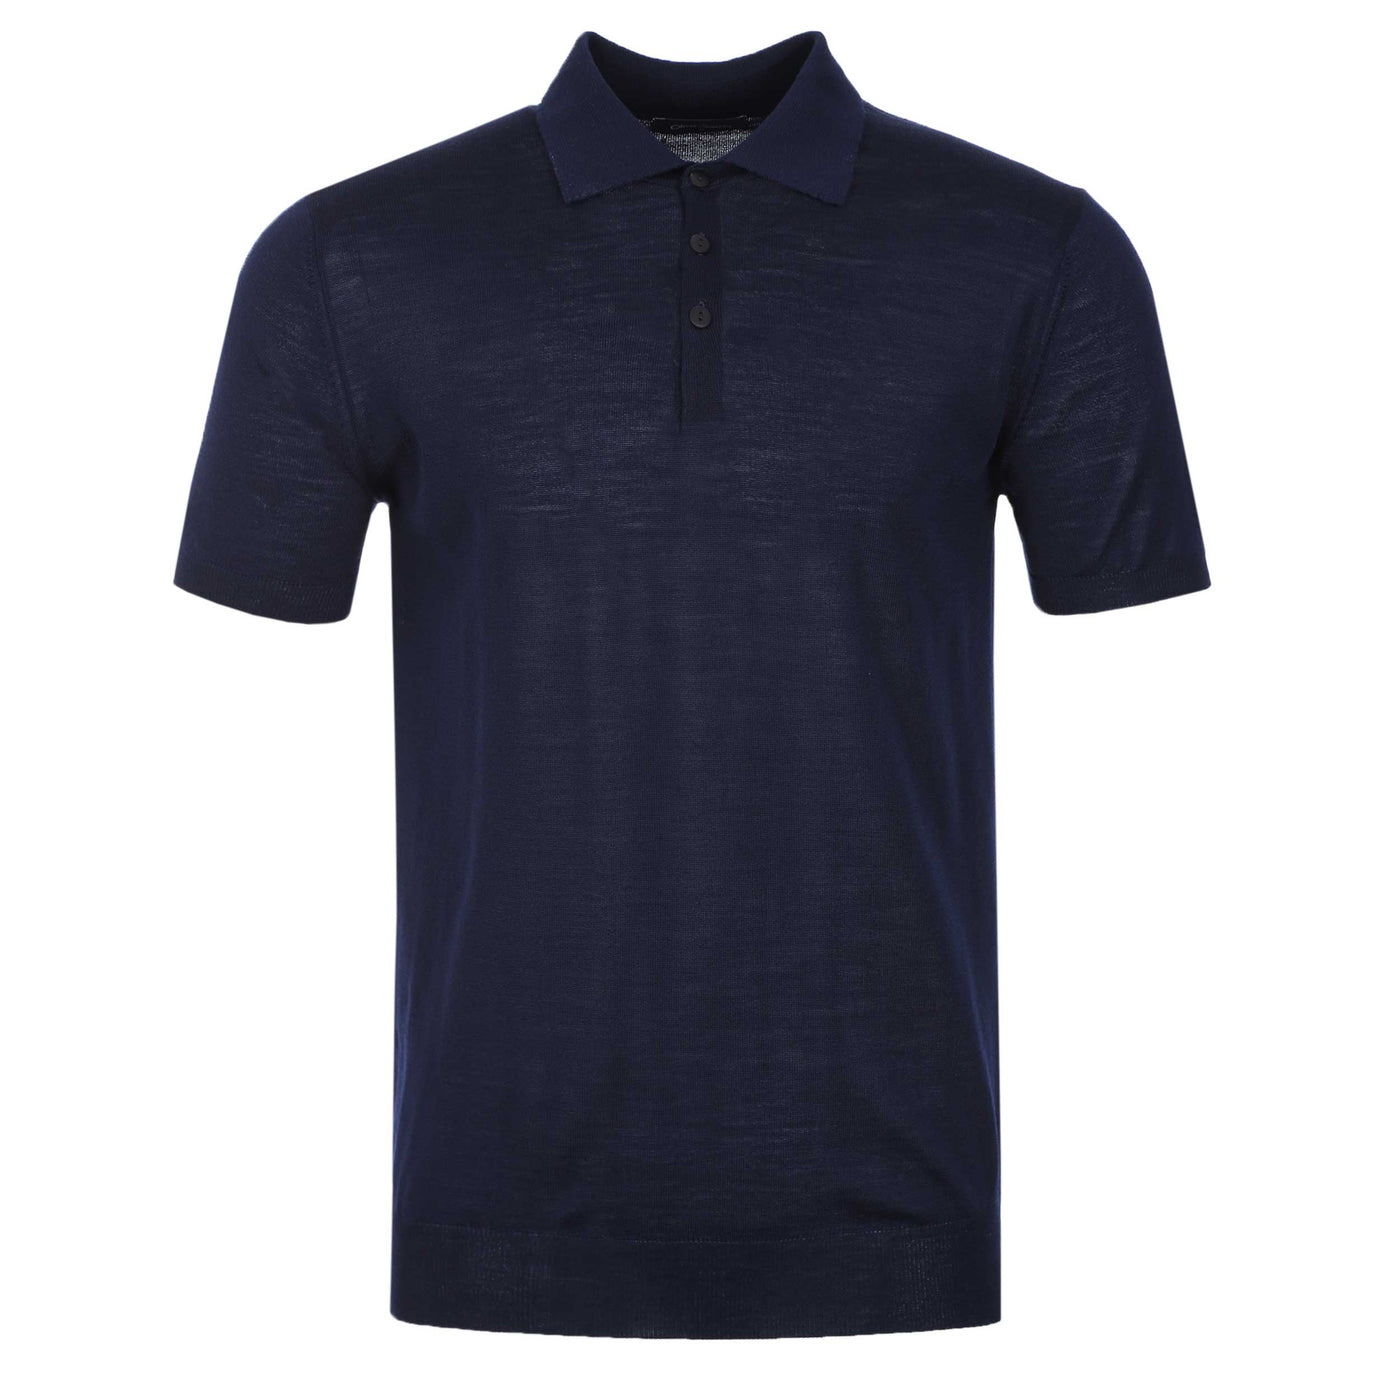 Oliver Sweeney Covehithe Polo Knitwear in Navy Front